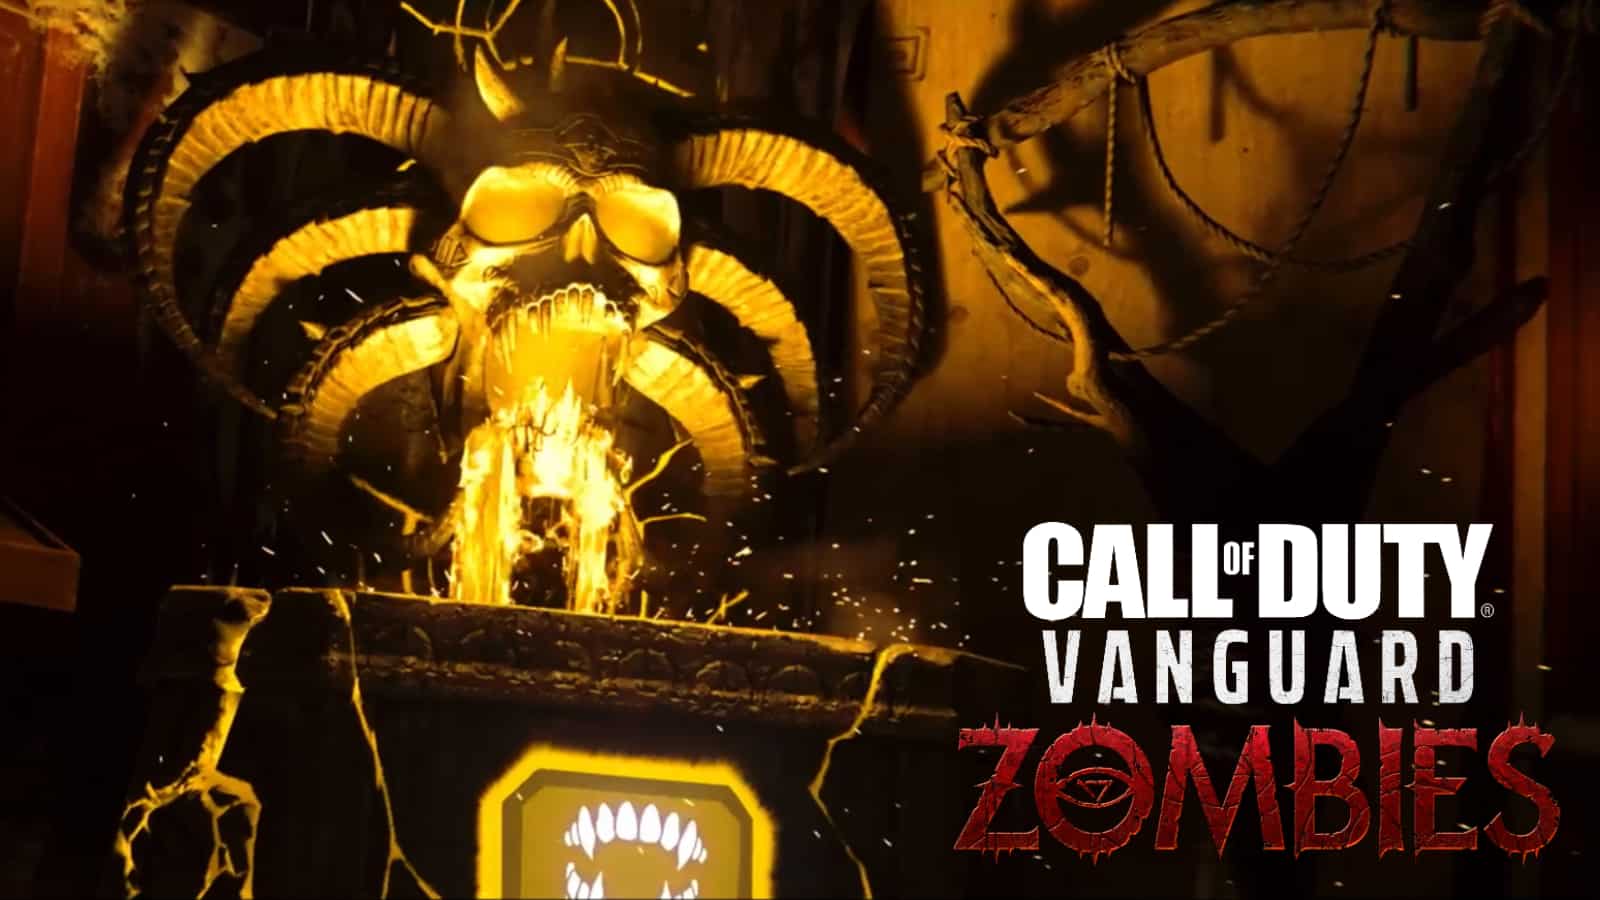 Vanguard Zombies revamped perks revealed: new names, upgrades, system